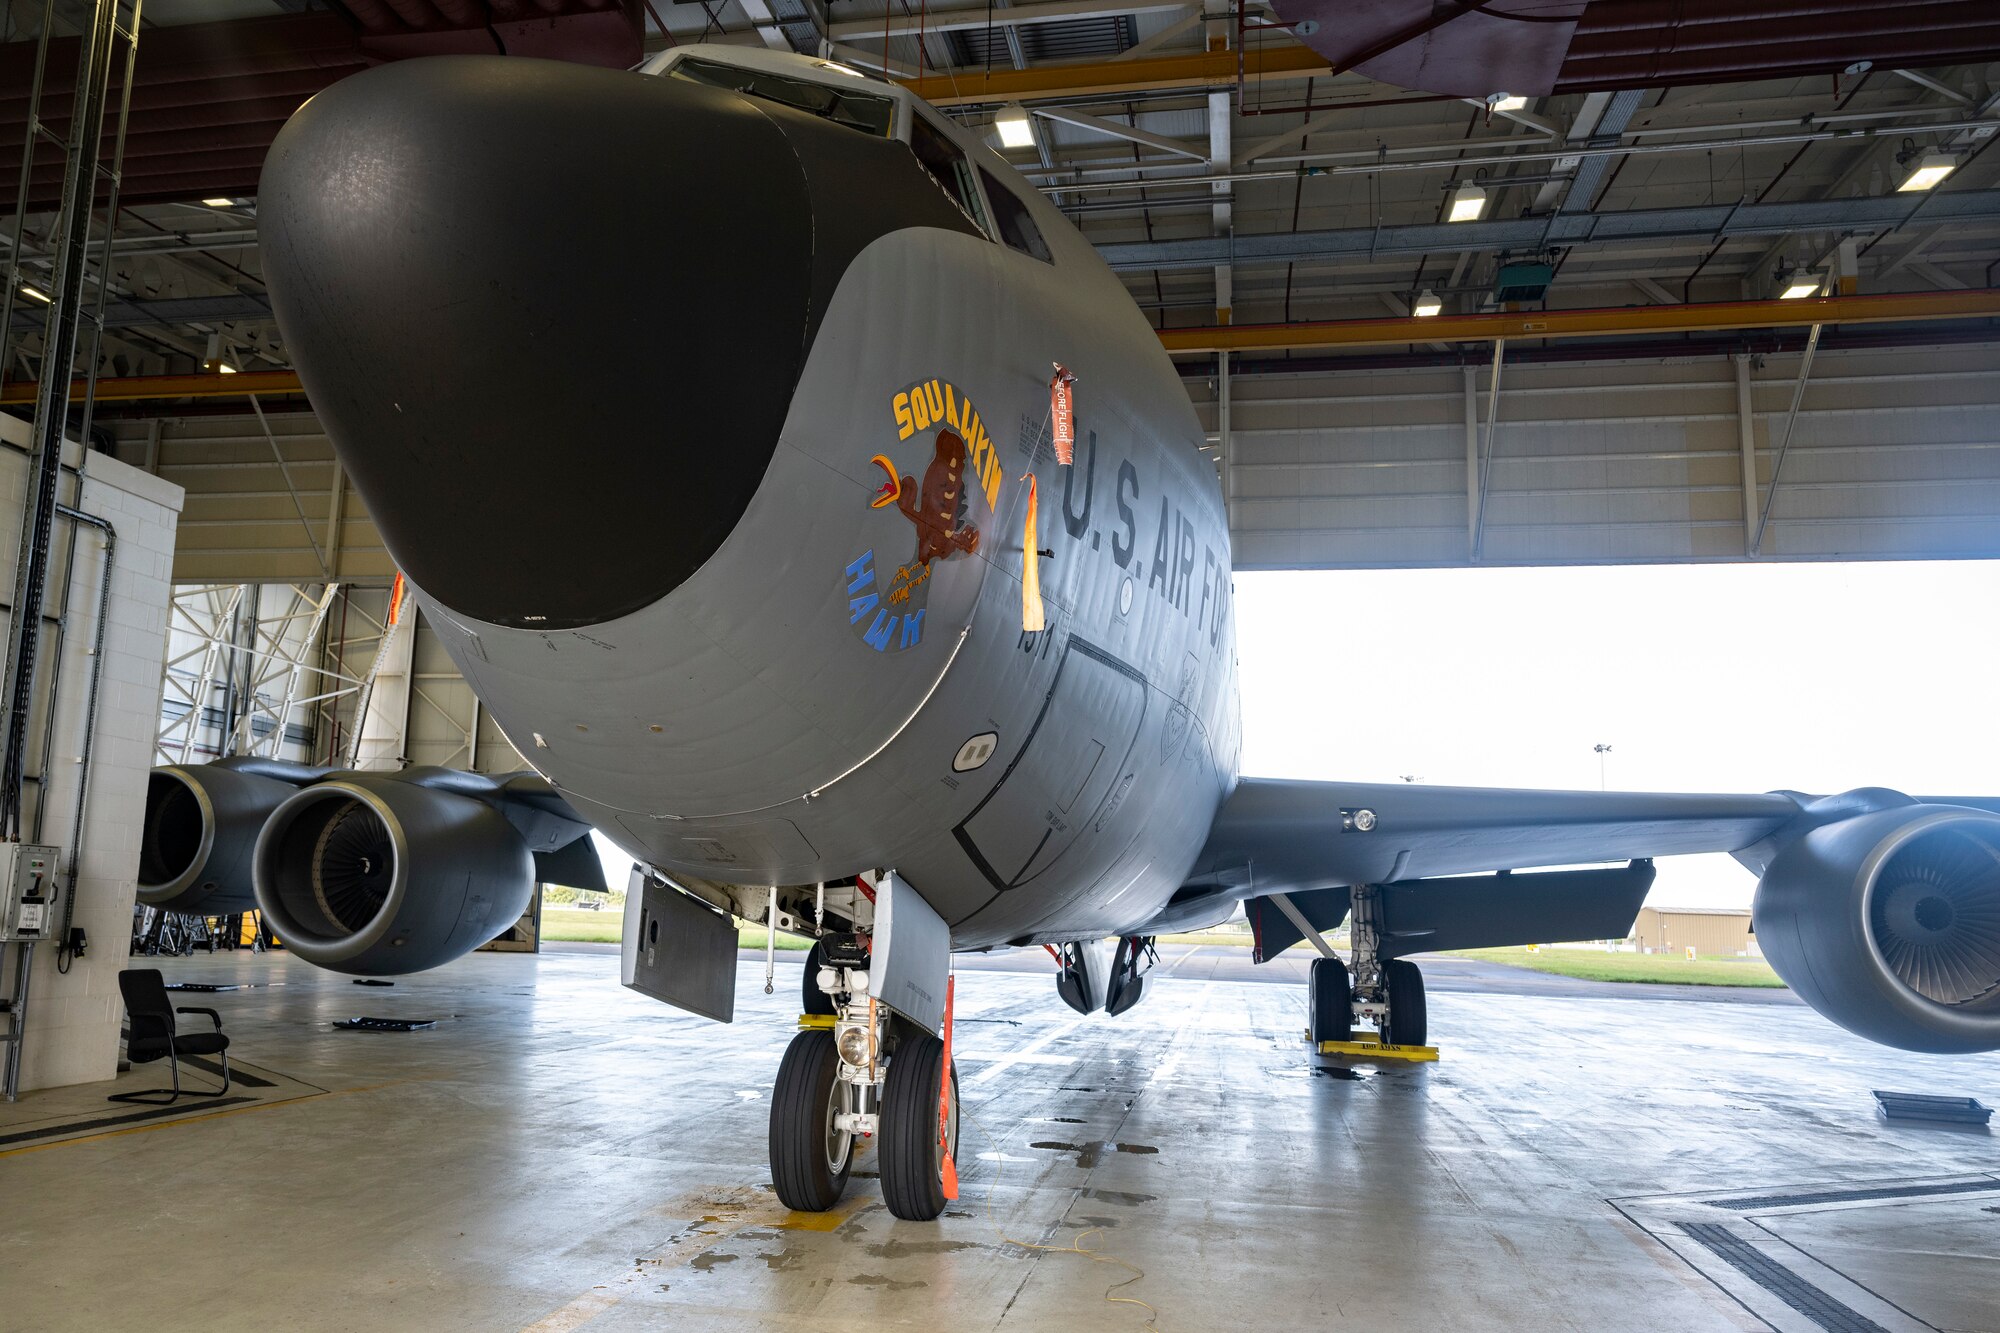 The nose art was installed to memorialize the 80th anniversary of the 8th Air Force for “Black Week” and honor the major losses from WWII.